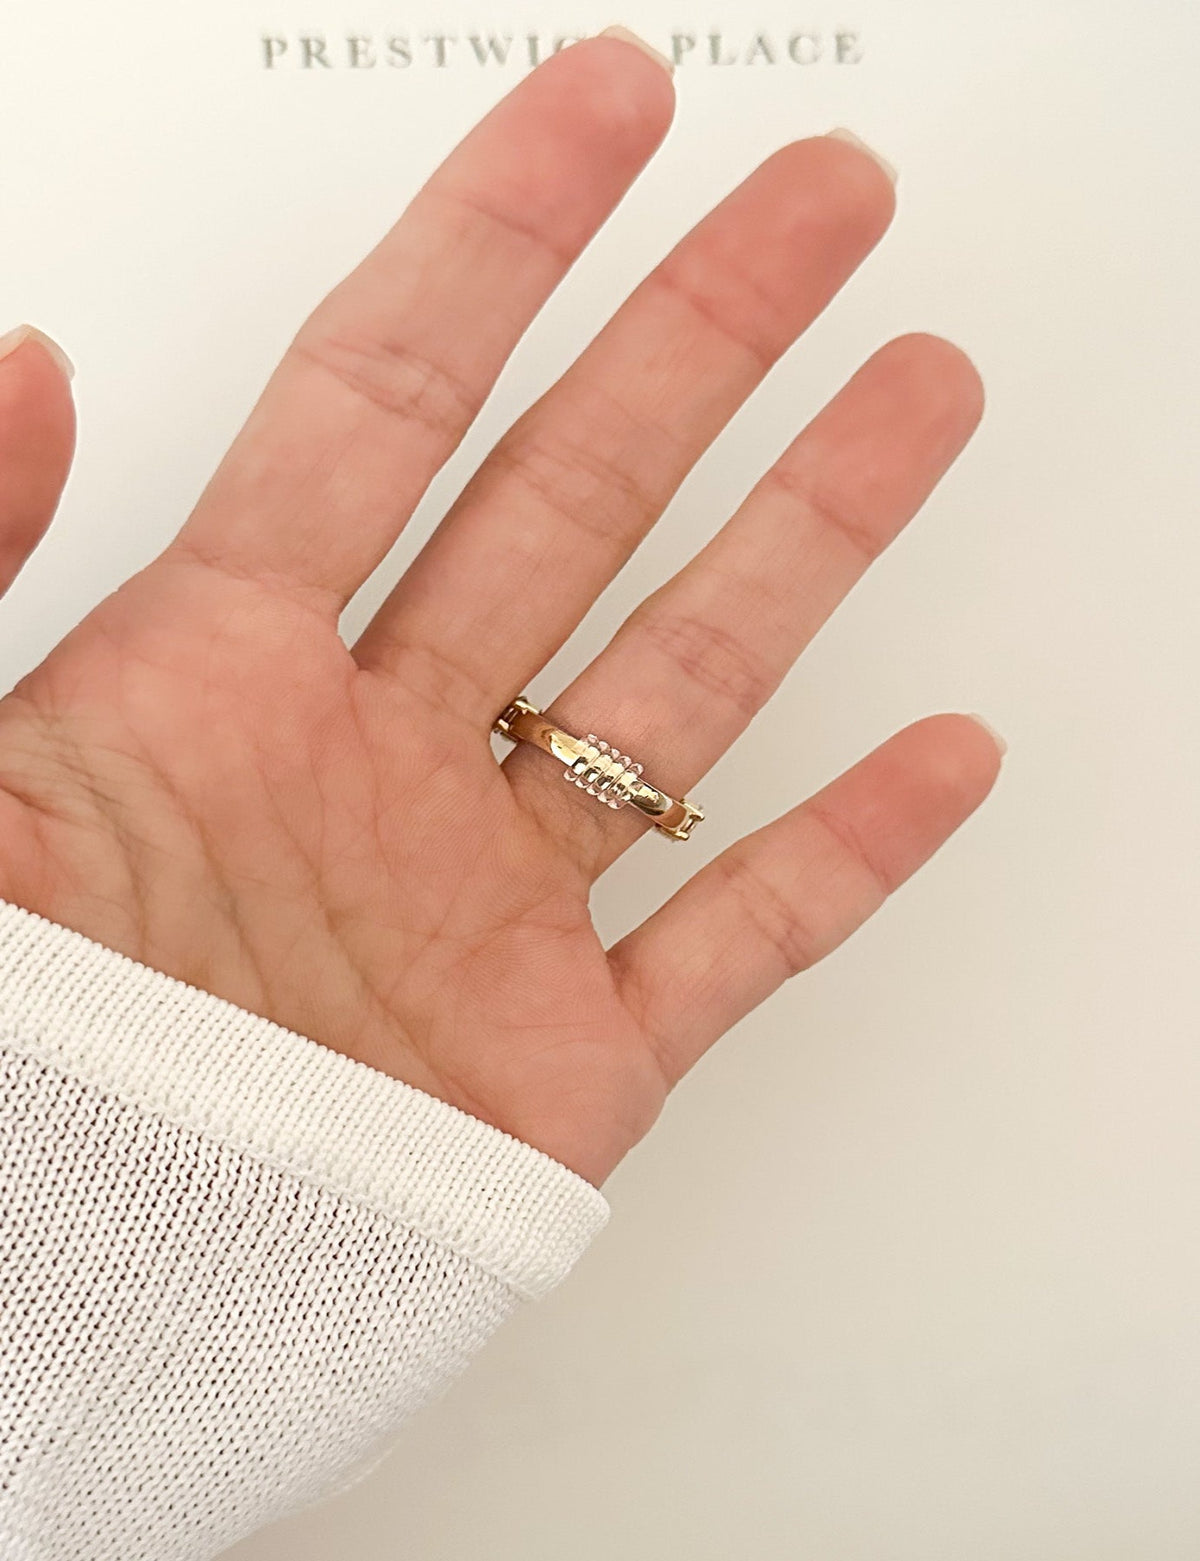 Invisible Ring Size Adjuster